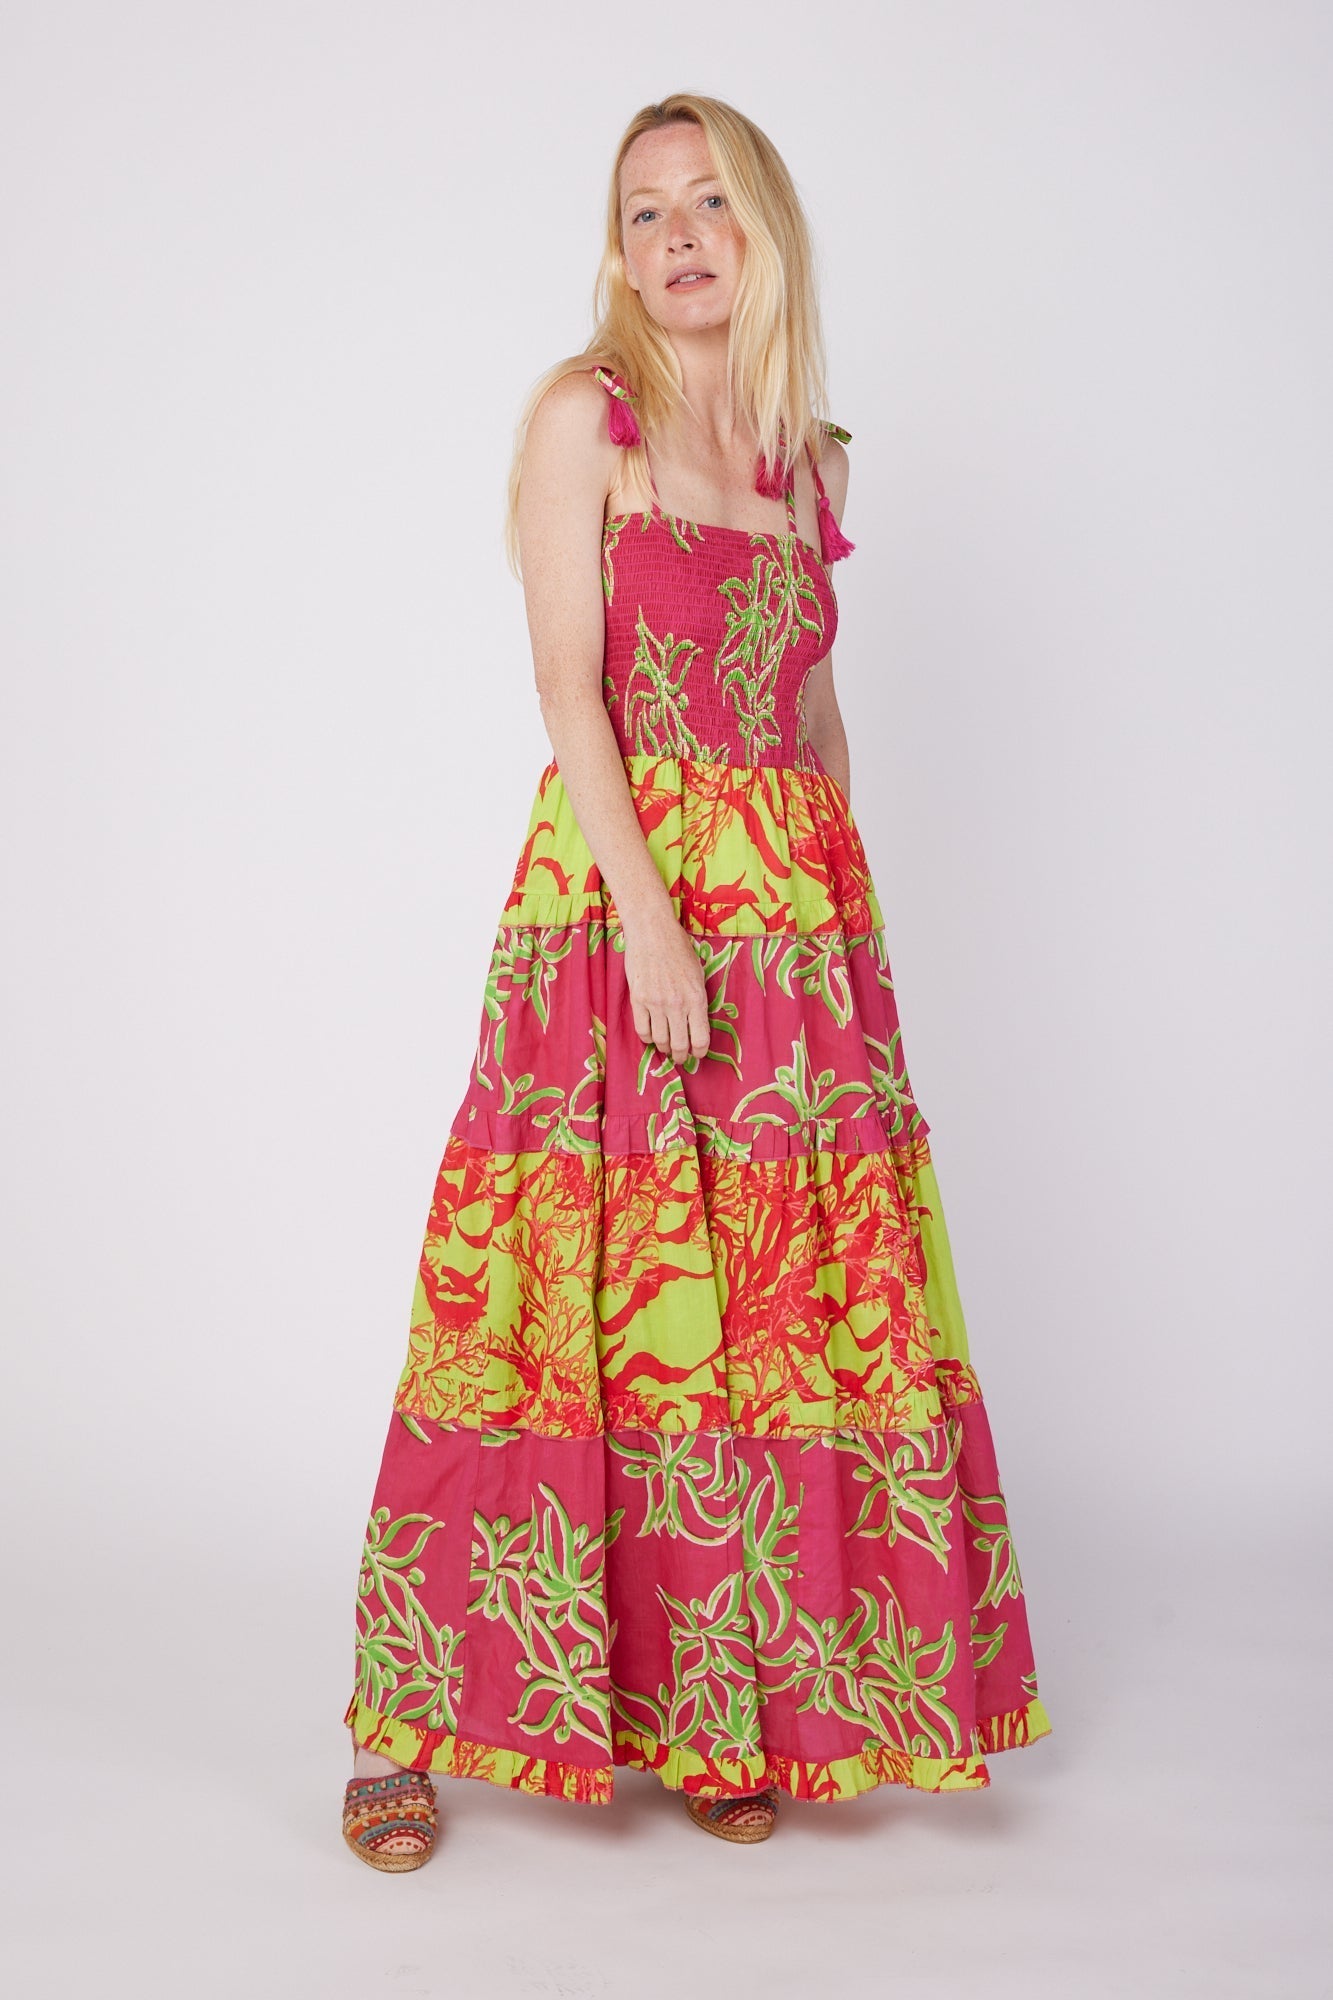 ModaPosa Dianora Spaghetti Strap Smocked Tiered Maxi Dress in Raspberry Lime Combo . Discover women's resort dresses and lifestyle clothing inspired by the Mediterranean. Free worldwide shipping available!